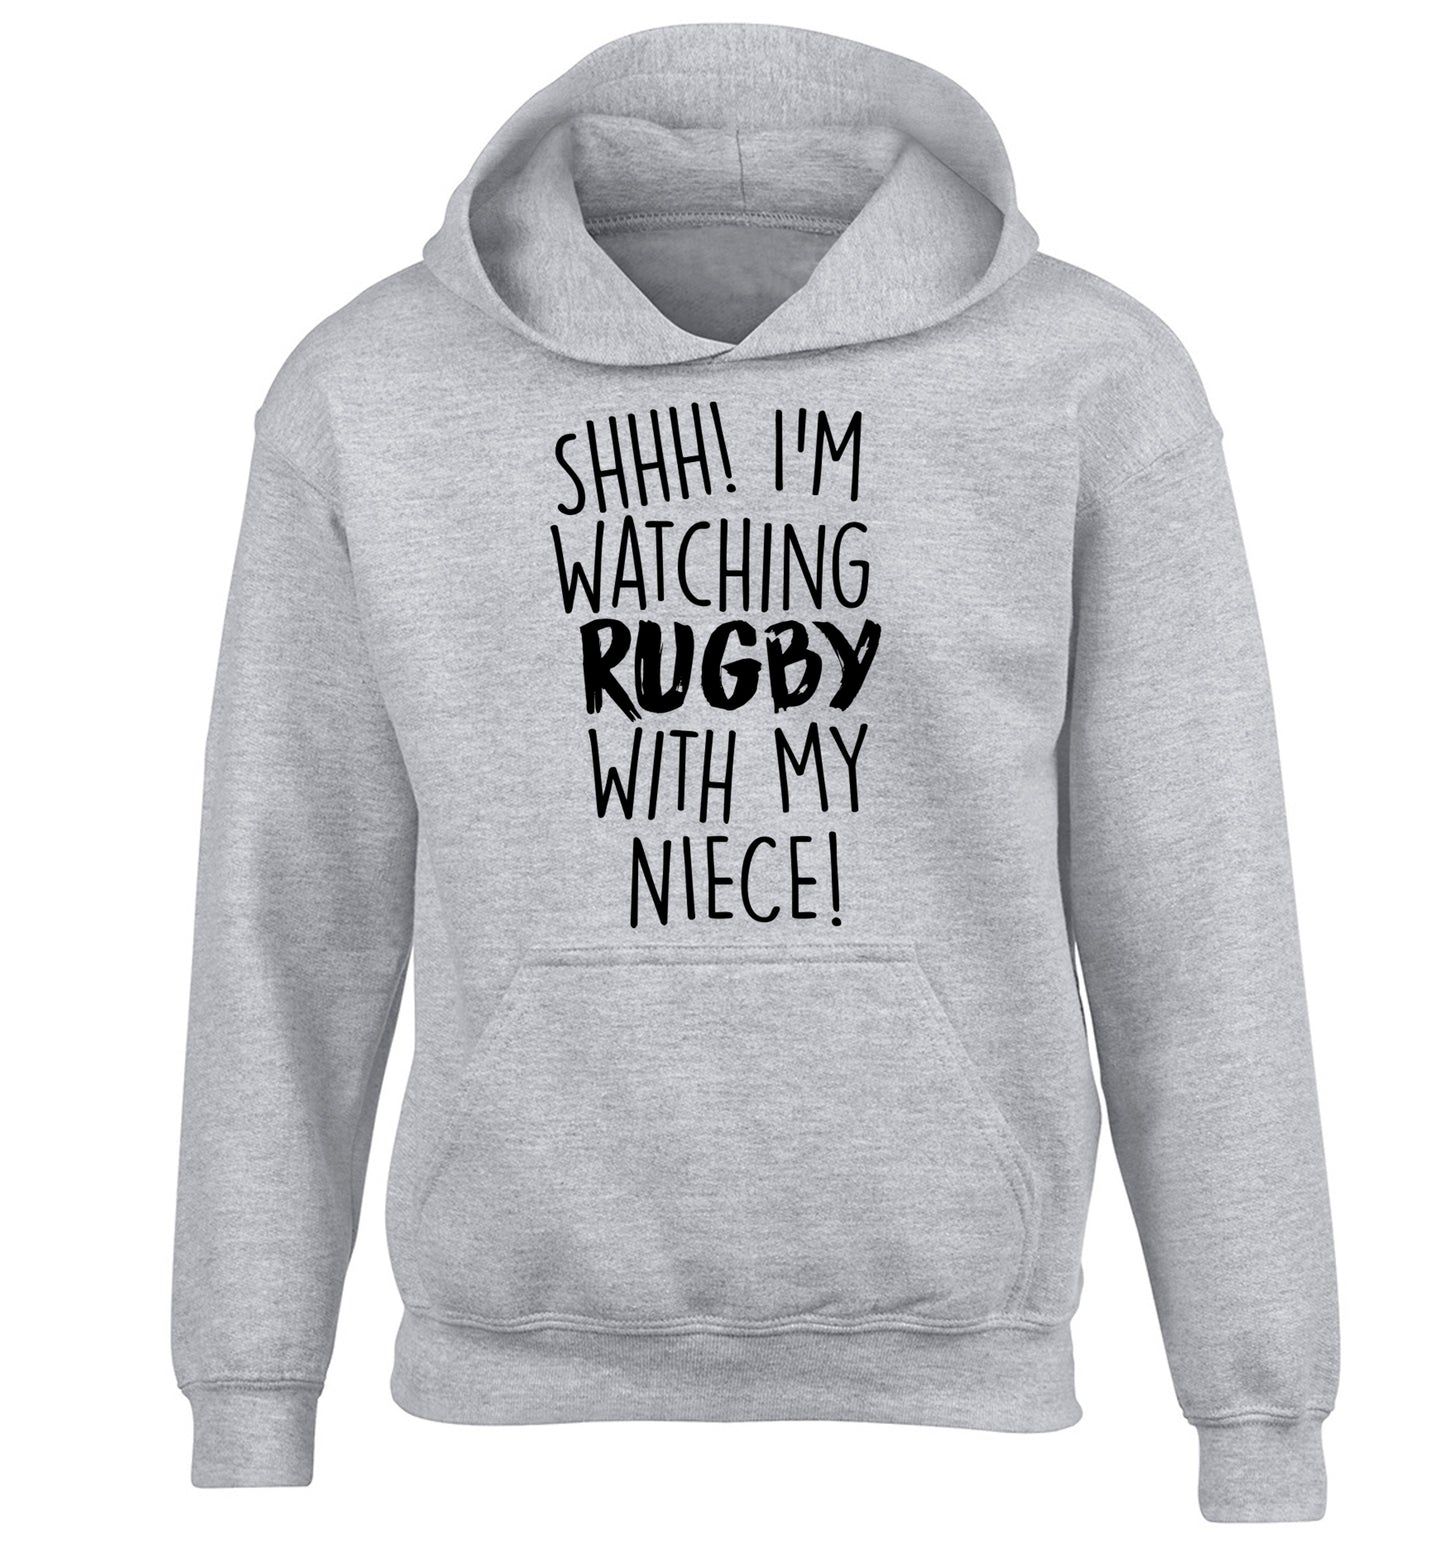 Shh.. I'm watching rugby with my niece children's grey hoodie 12-13 Years